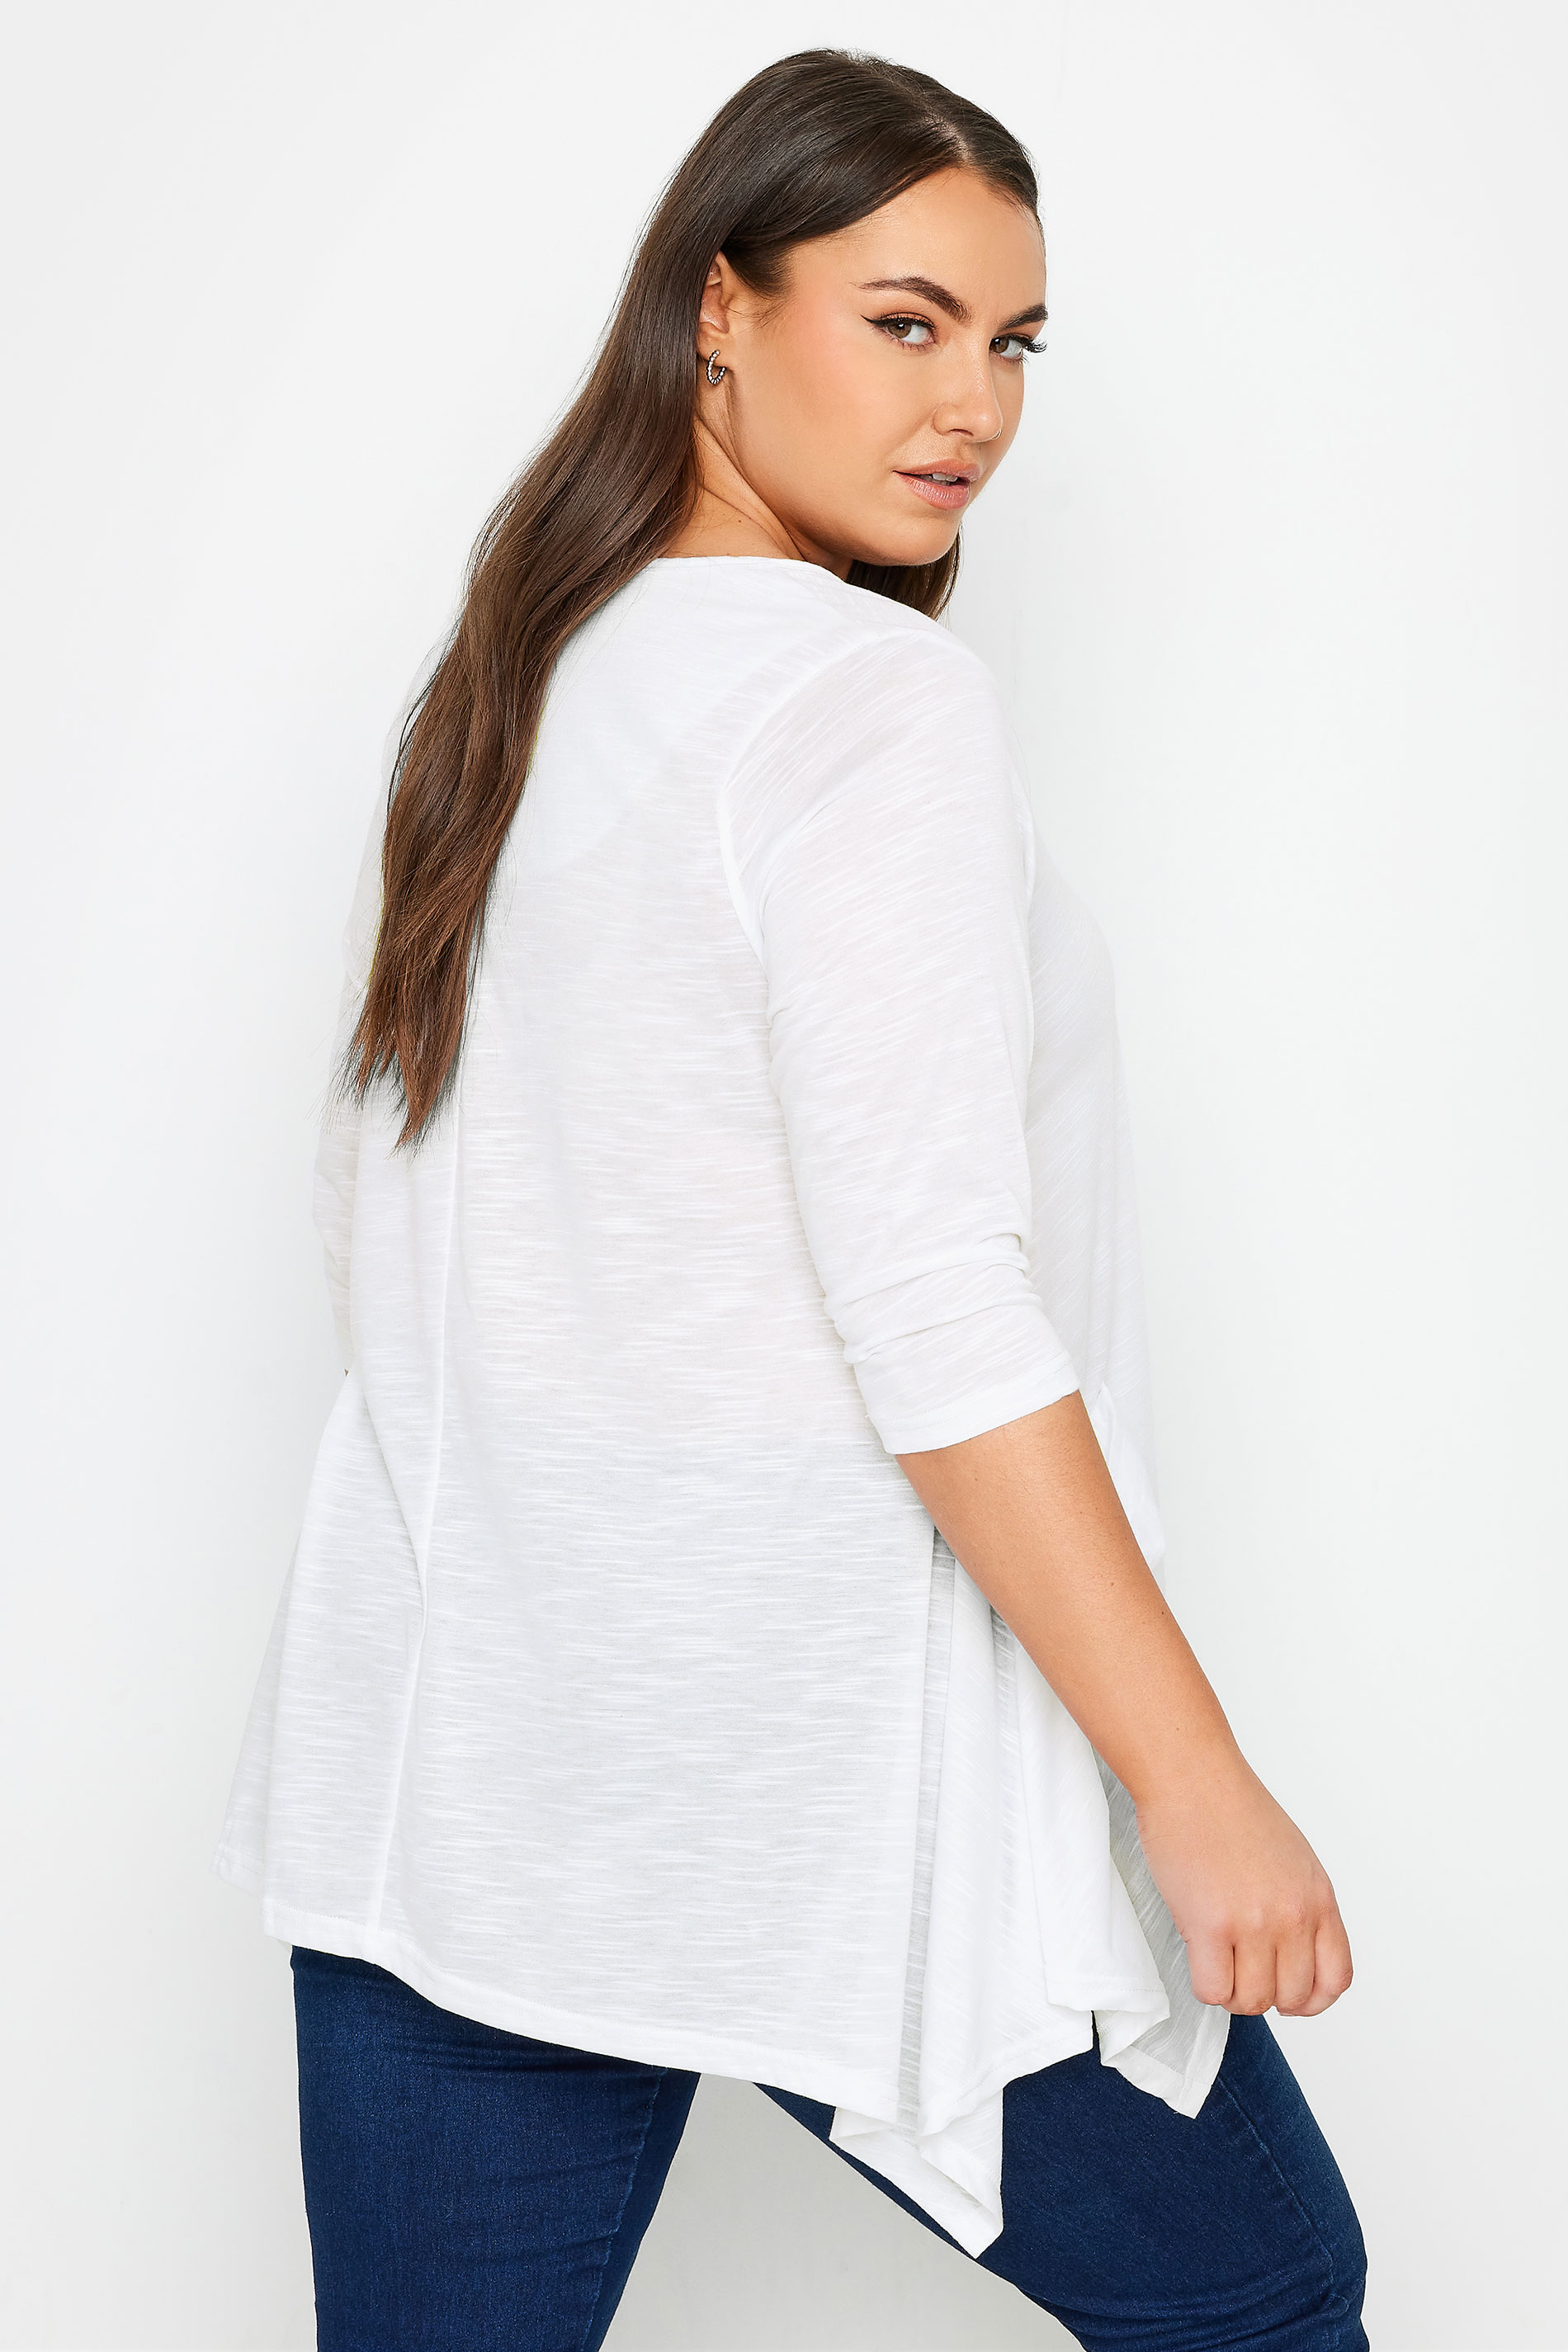 YOURS Plus Size White Hanky Hem Pocket Top | Yours Clothing 3